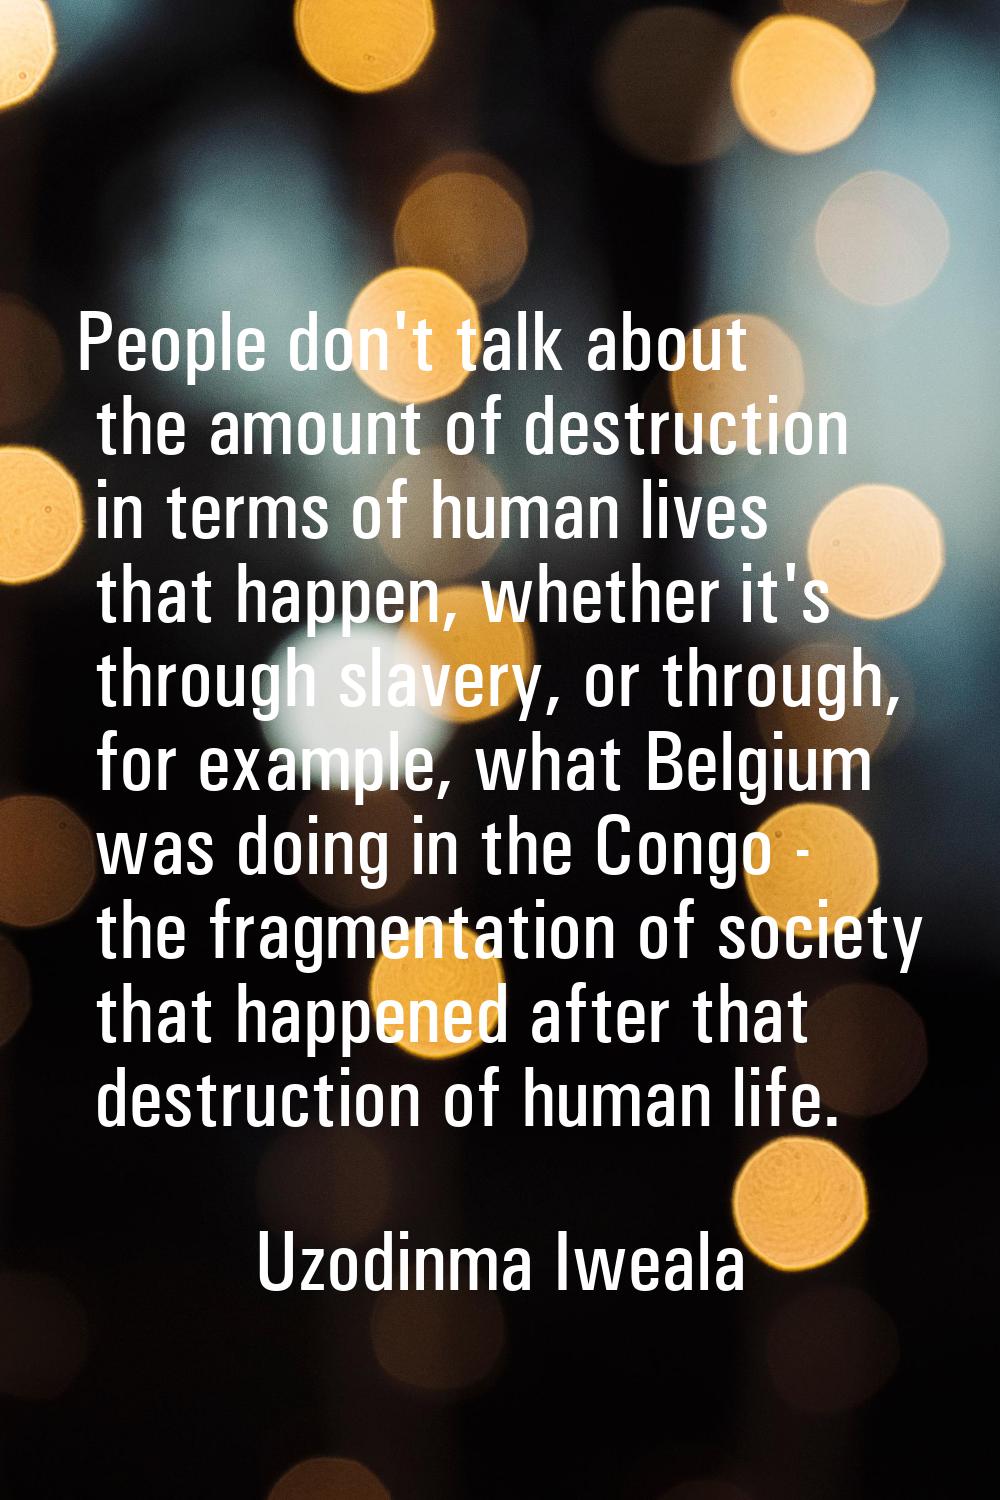 People don't talk about the amount of destruction in terms of human lives that happen, whether it's